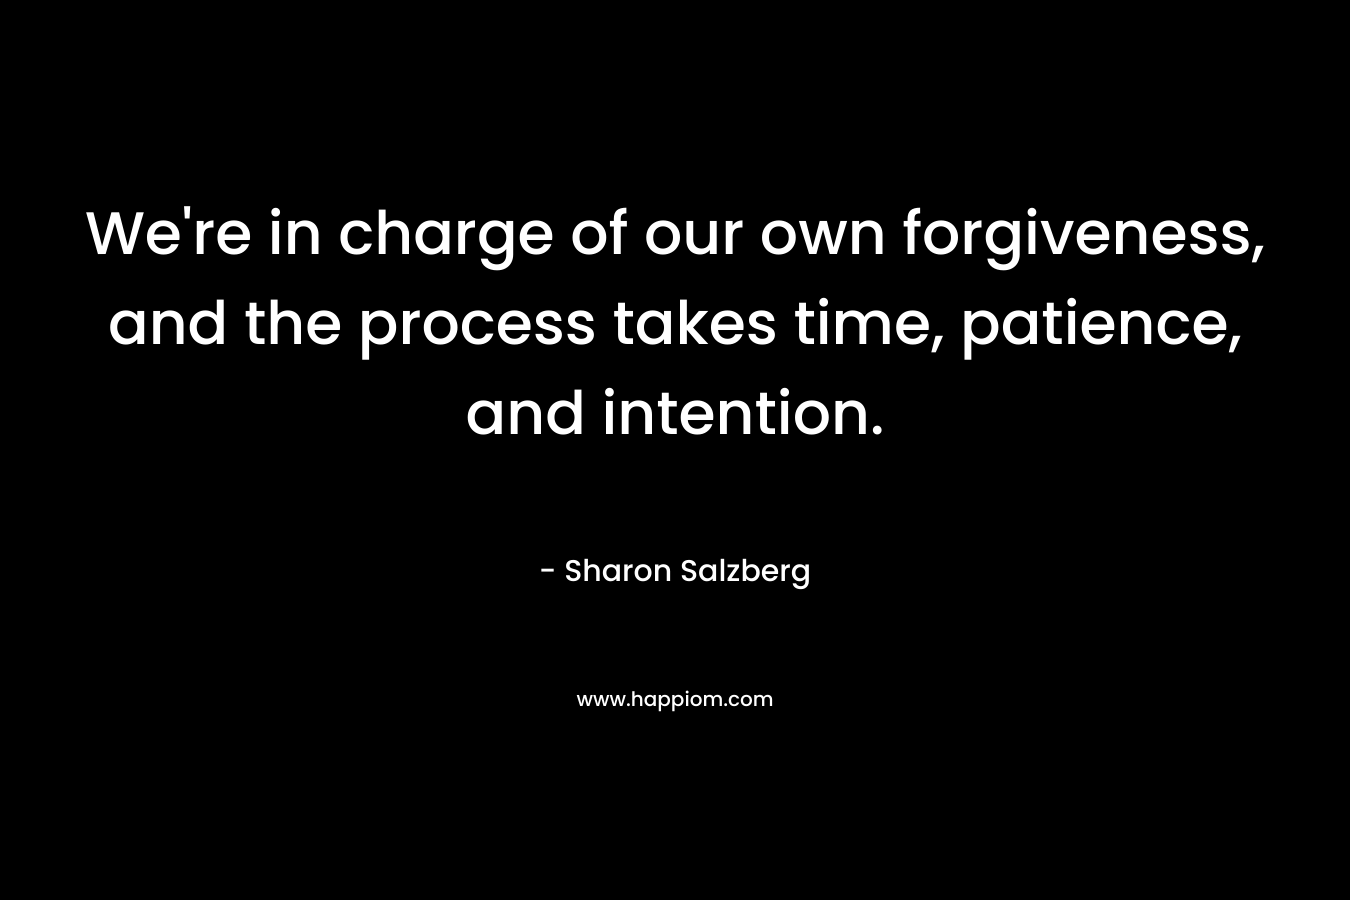 We're in charge of our own forgiveness, and the process takes time, patience, and intention.